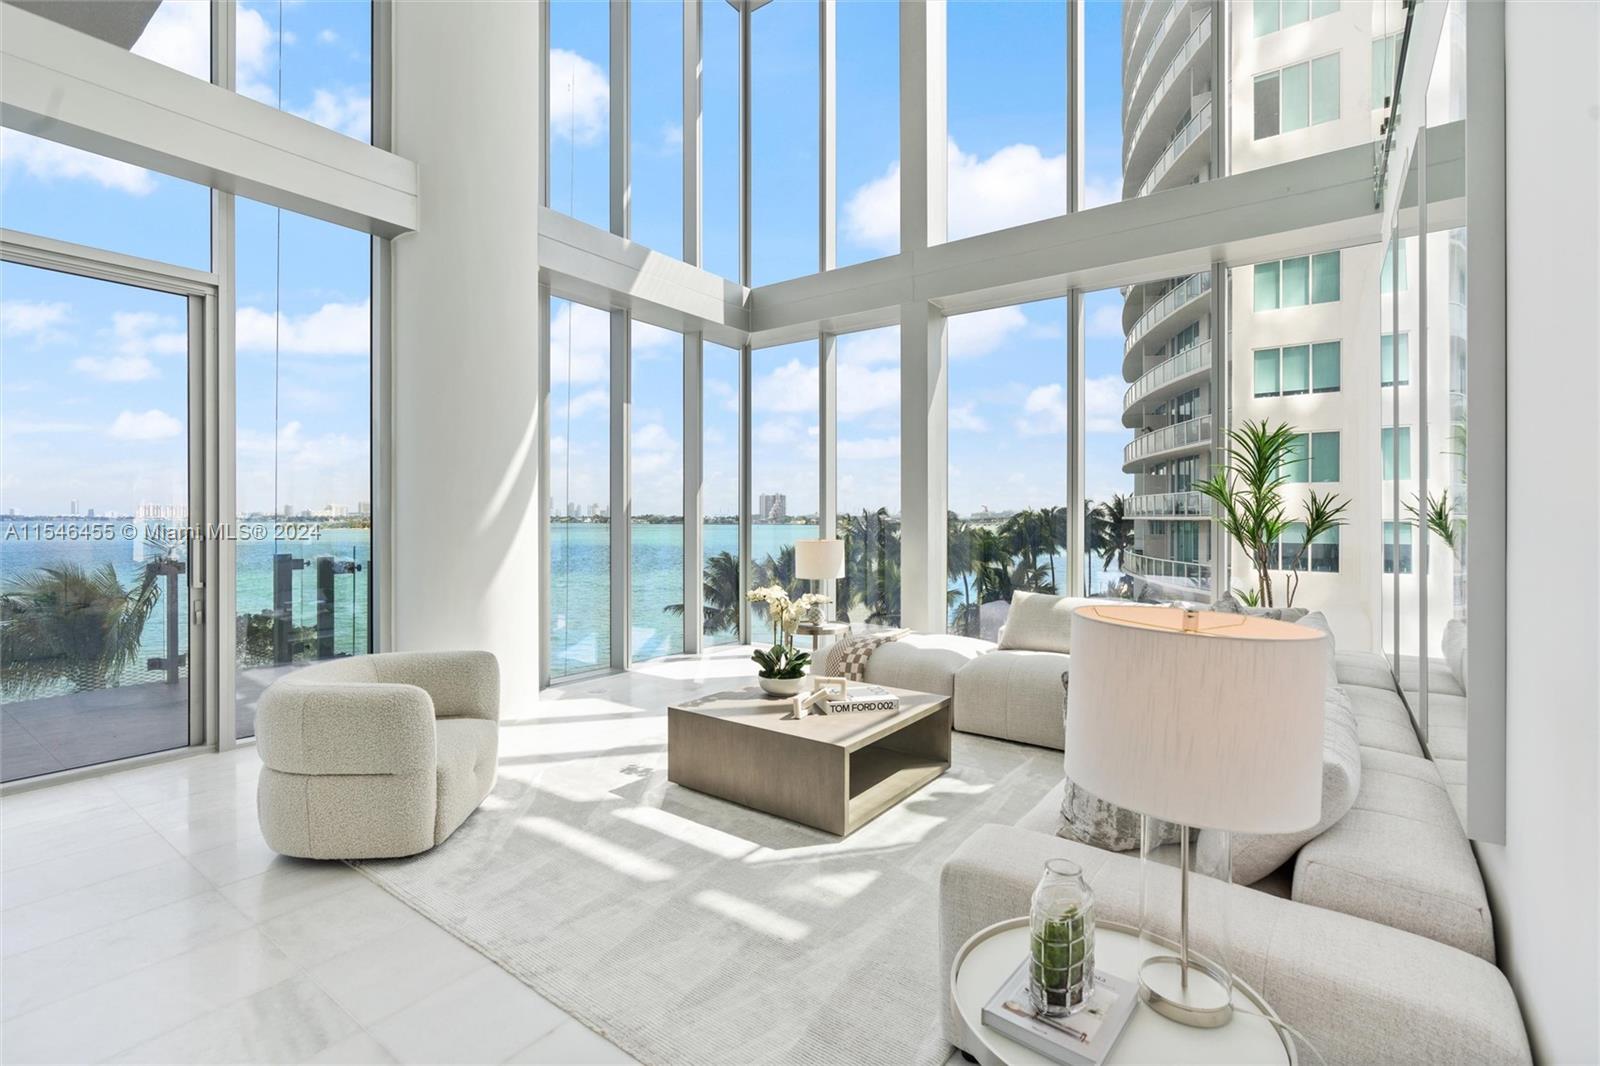 Discover the luxury living at Missoni Baia Residences, in the heart of Miami. This exclusive waterfront property offers a 6-bedroom, 6.5-bathroom, 2-story townhome with breathtaking views of Biscayne Bay. As you step into the foyer, you'll be greeted by stunning marble Calacatta flooring leading to an open floor plan, perfect for entertaining guests. Enjoy the convenience of a private elevator and top-of-the-line appliances in the kitchen. The townhome also features a maid's quarters and laundry for added comfort. Missoni Baia offers various curated amenities designed by fashion brand designers to enhance your lifestyle. Indulge in the spa, lounge by the pool, or play a game of tennis on the court. The nearby Miami Design District offers art, culture, shopping, & dining experiences.